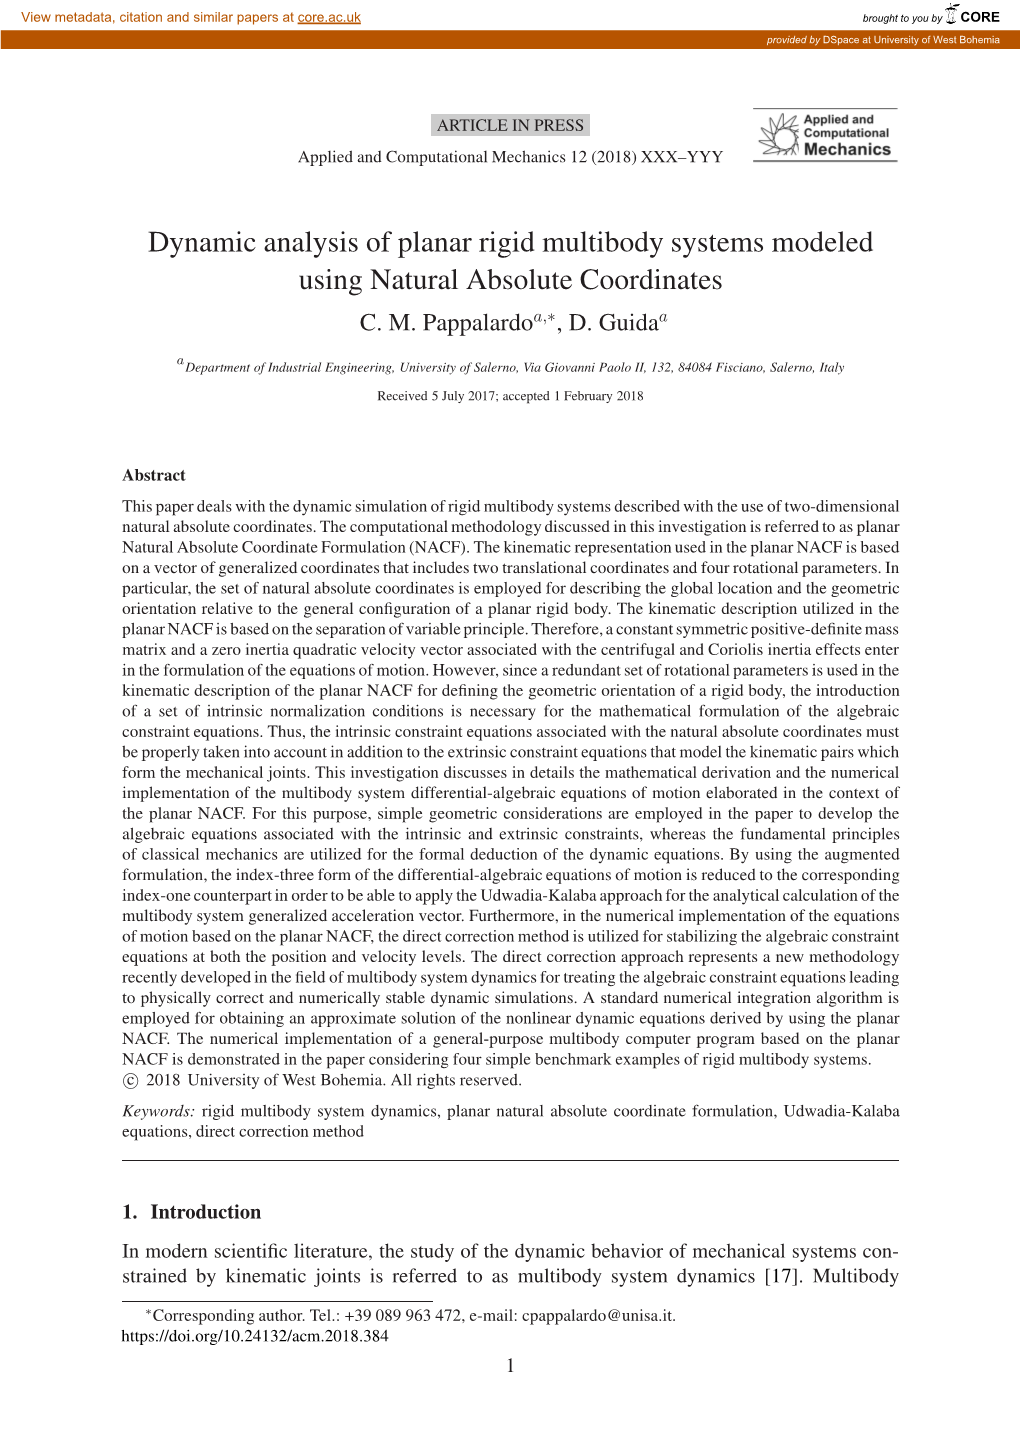 Dynamic Analysis of Planar Rigid Multibody Systems Modeled Using Natural Absolute Coordinates C